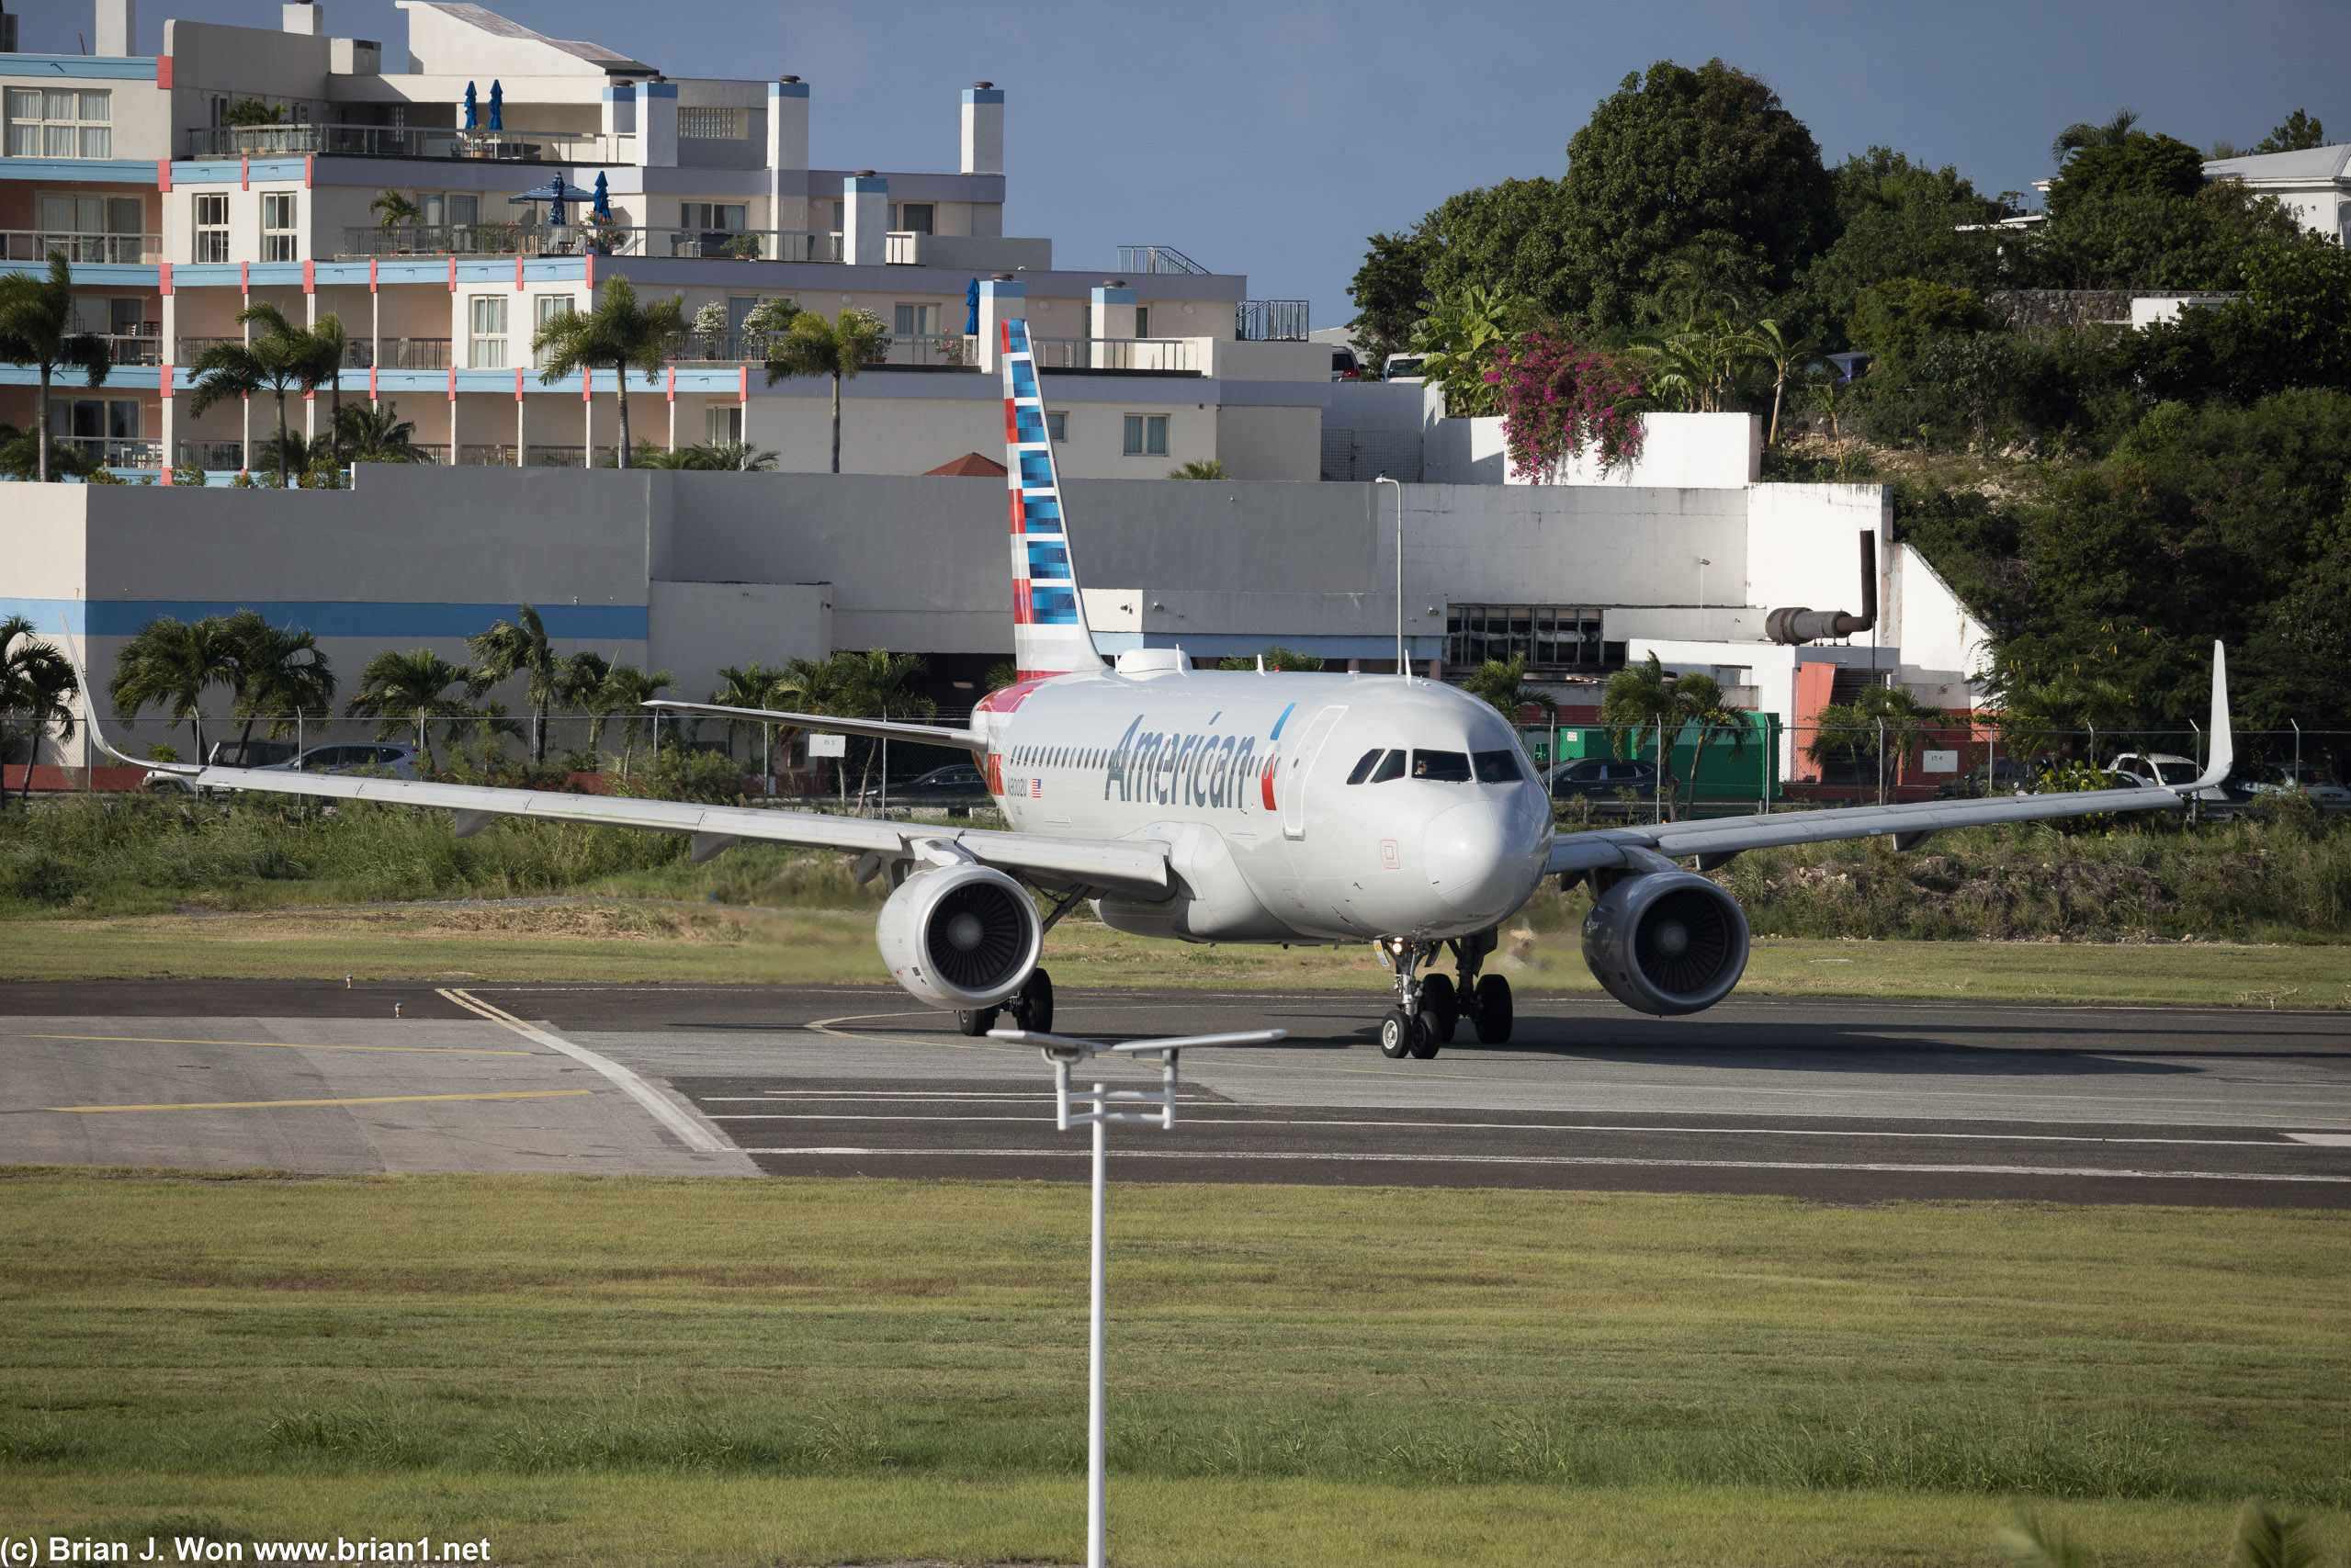 American Airlines Airbus A319 taxiing on to the runway.